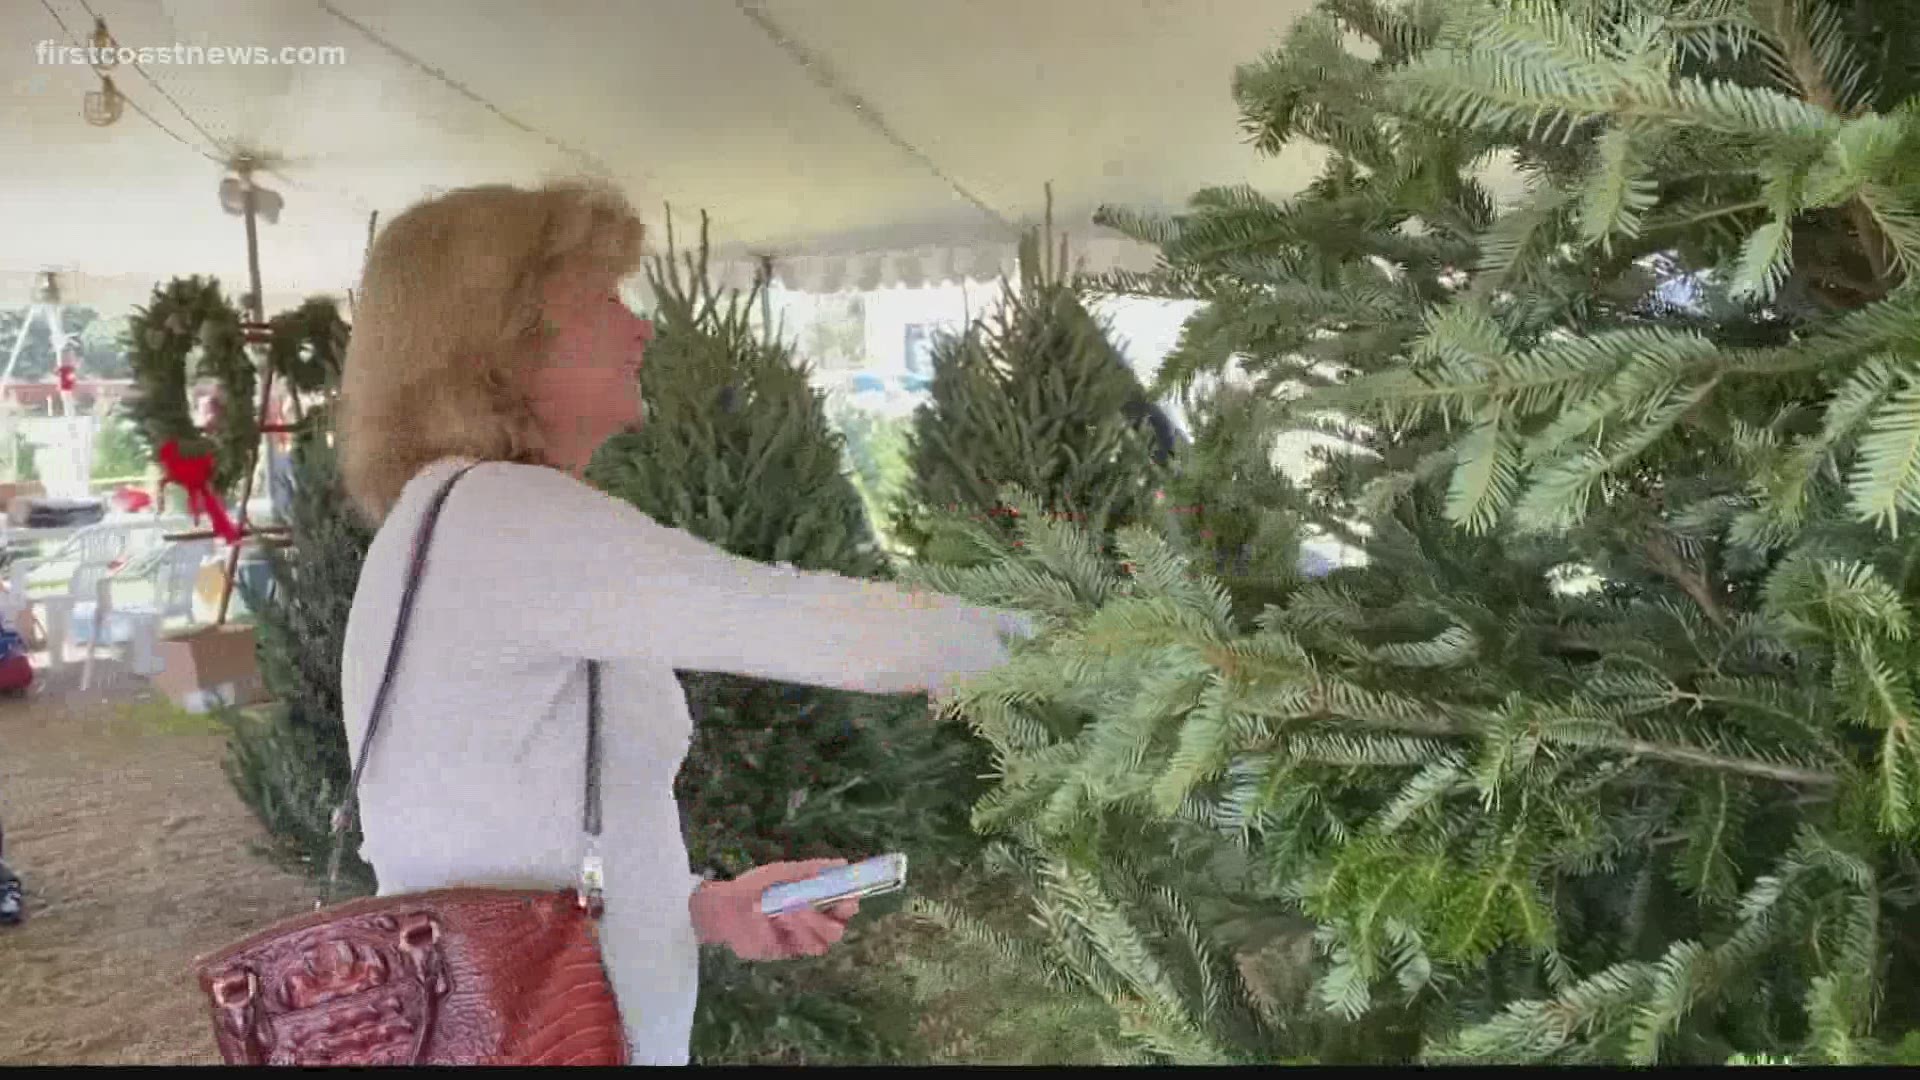 "I believe the pandemic has brought people out to put some love and laughter back in their lives," said Star Robertson, Severt's Christmas Tree Farms Lot Manager.